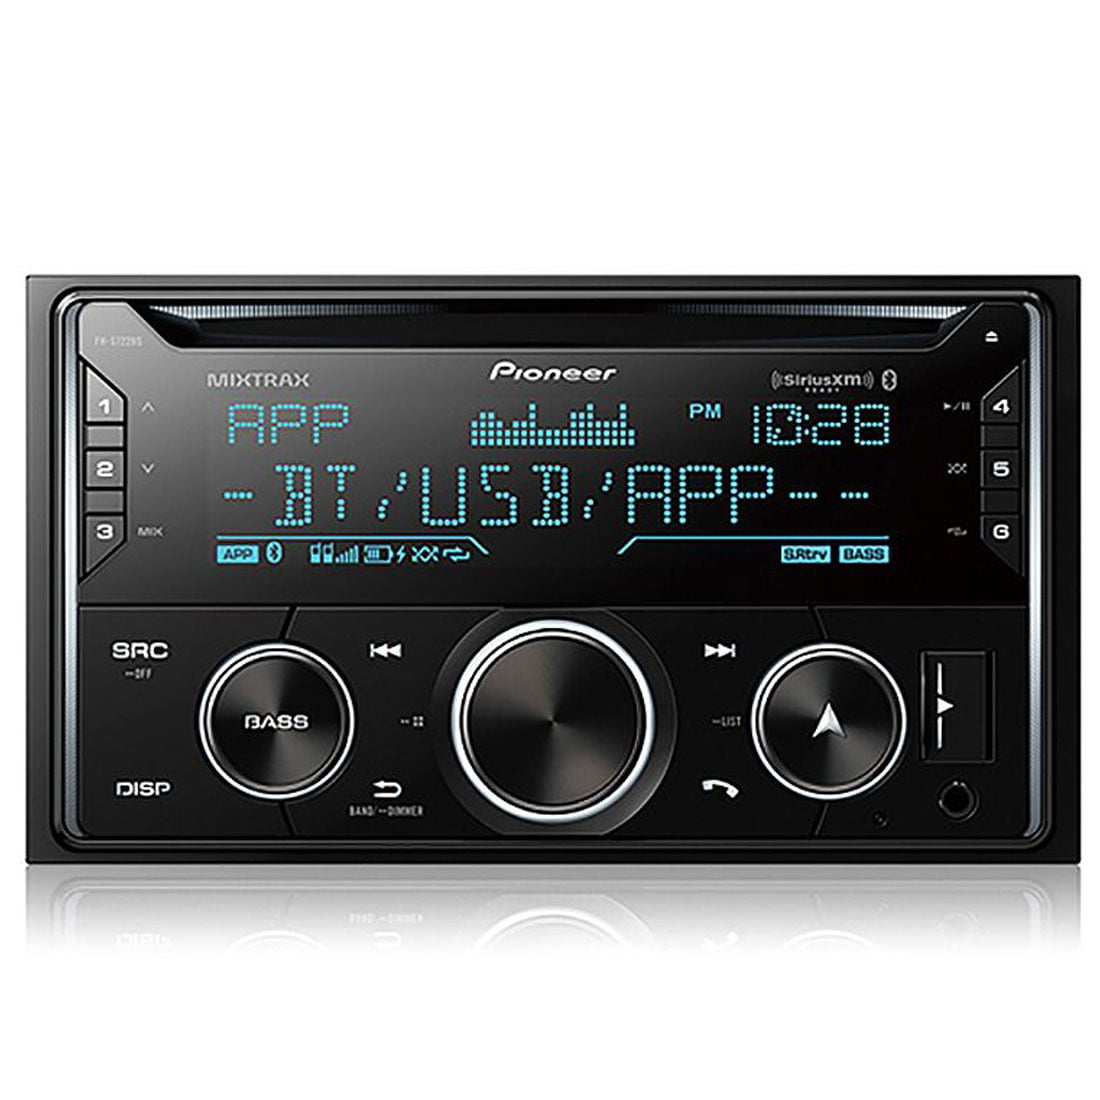 Pioneer MVH-S622BS Double-Din Digital Media Receiver Built-in Bluetooth (does not play CDs)